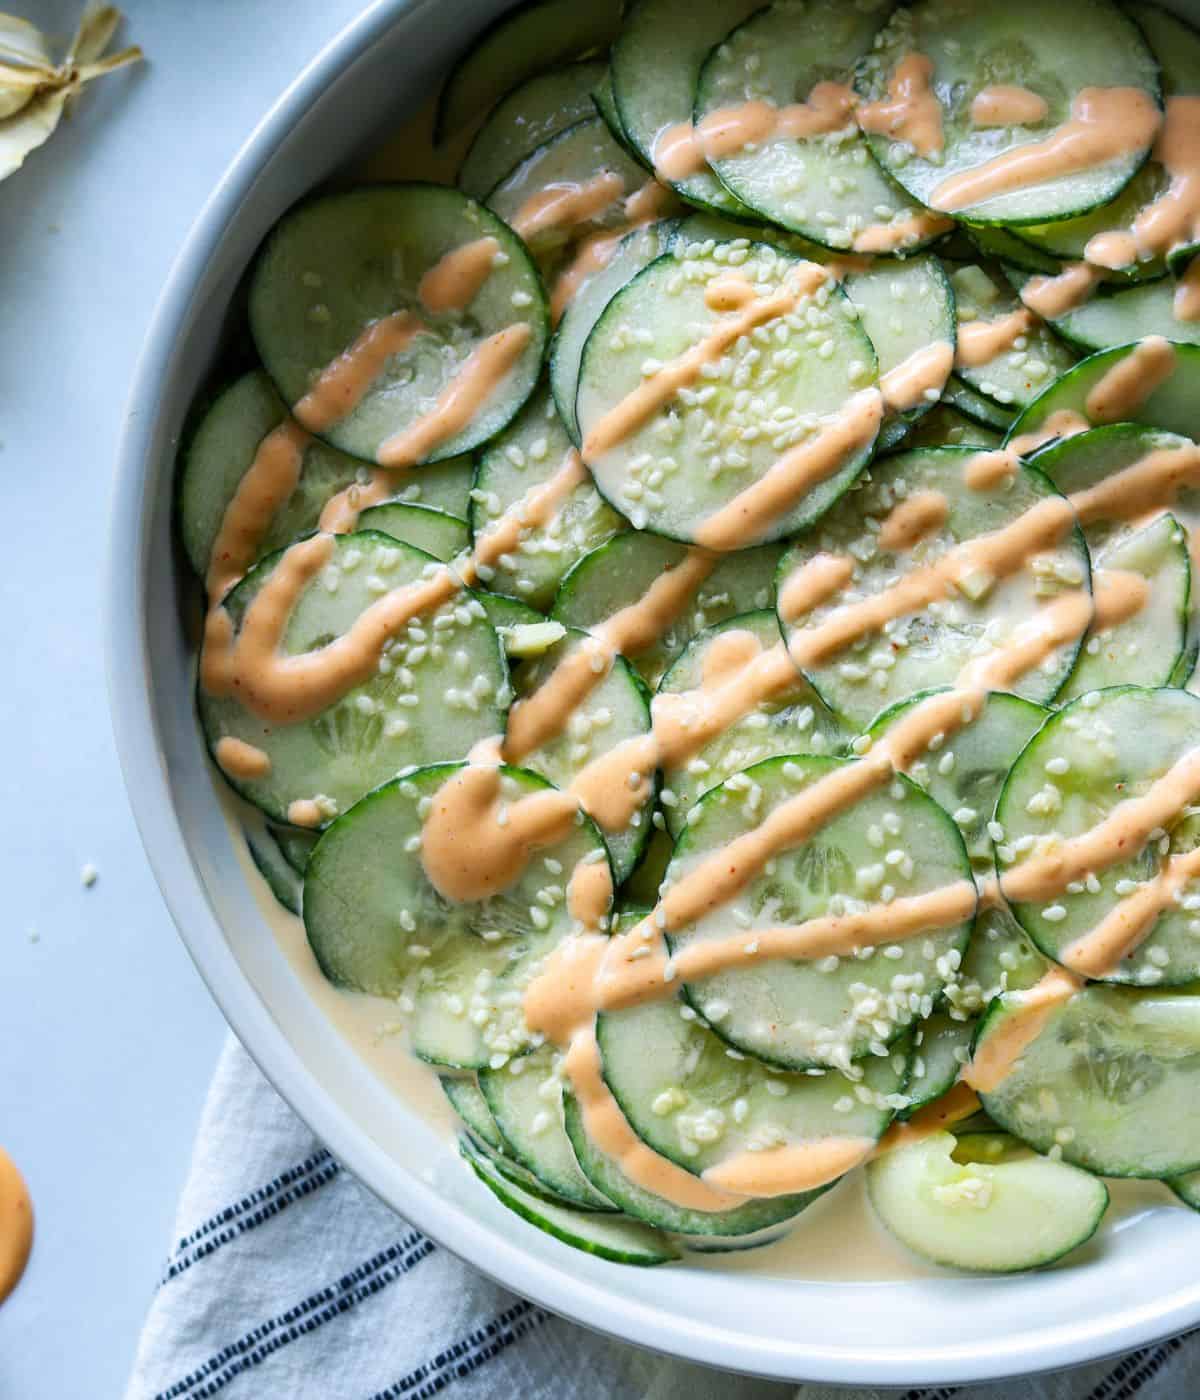 spicy cucumber salad topped with sriracha mayo